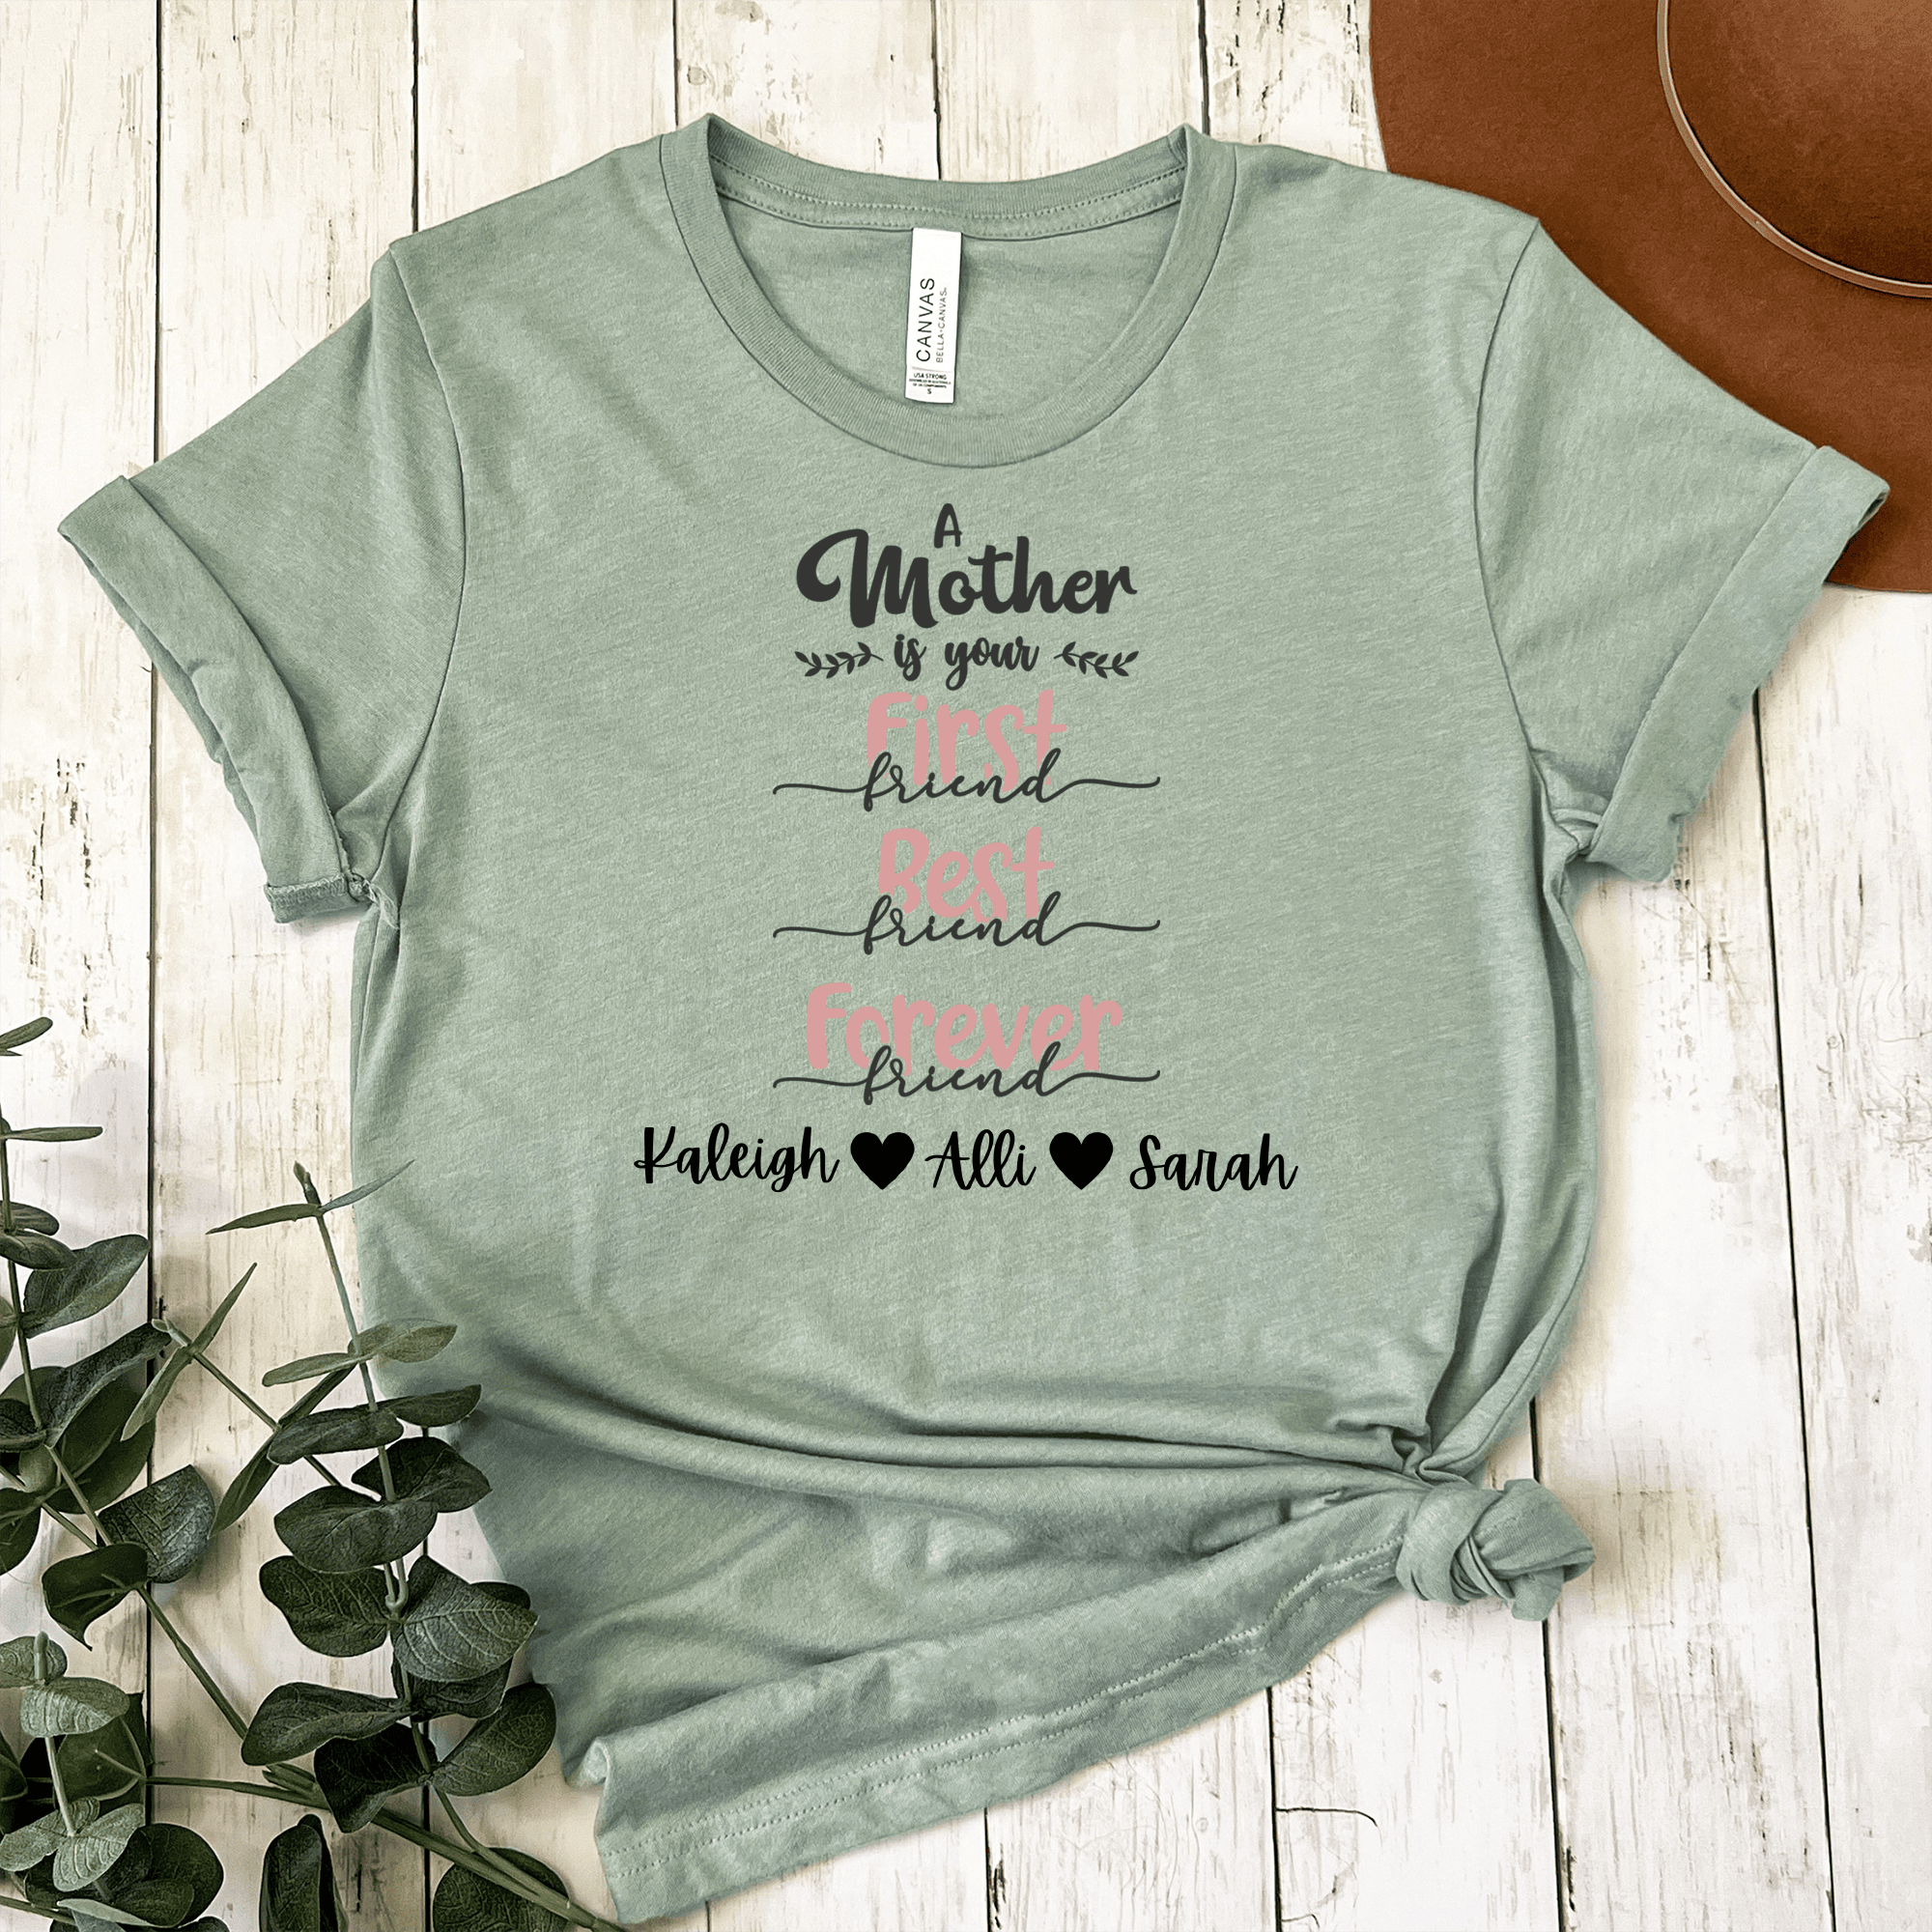 Womens Light Green T Shirt with Moms-Are-First design